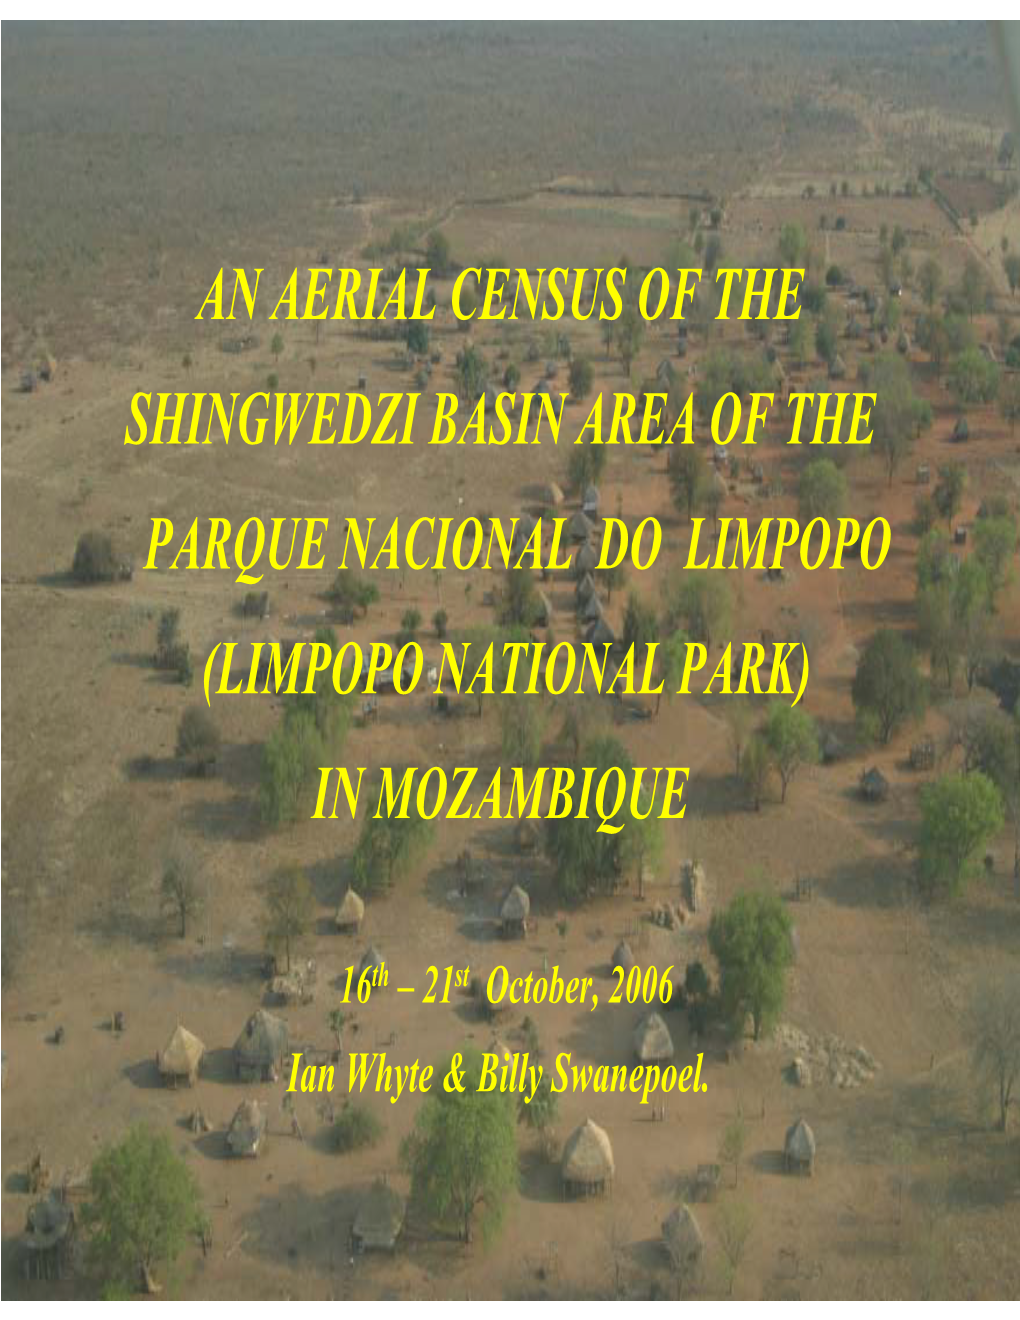 An Aerial Census of the Shingwedzi Basin Area of the Parque Nacional Do Limpopo (Limpopo National Park) in Mozambique